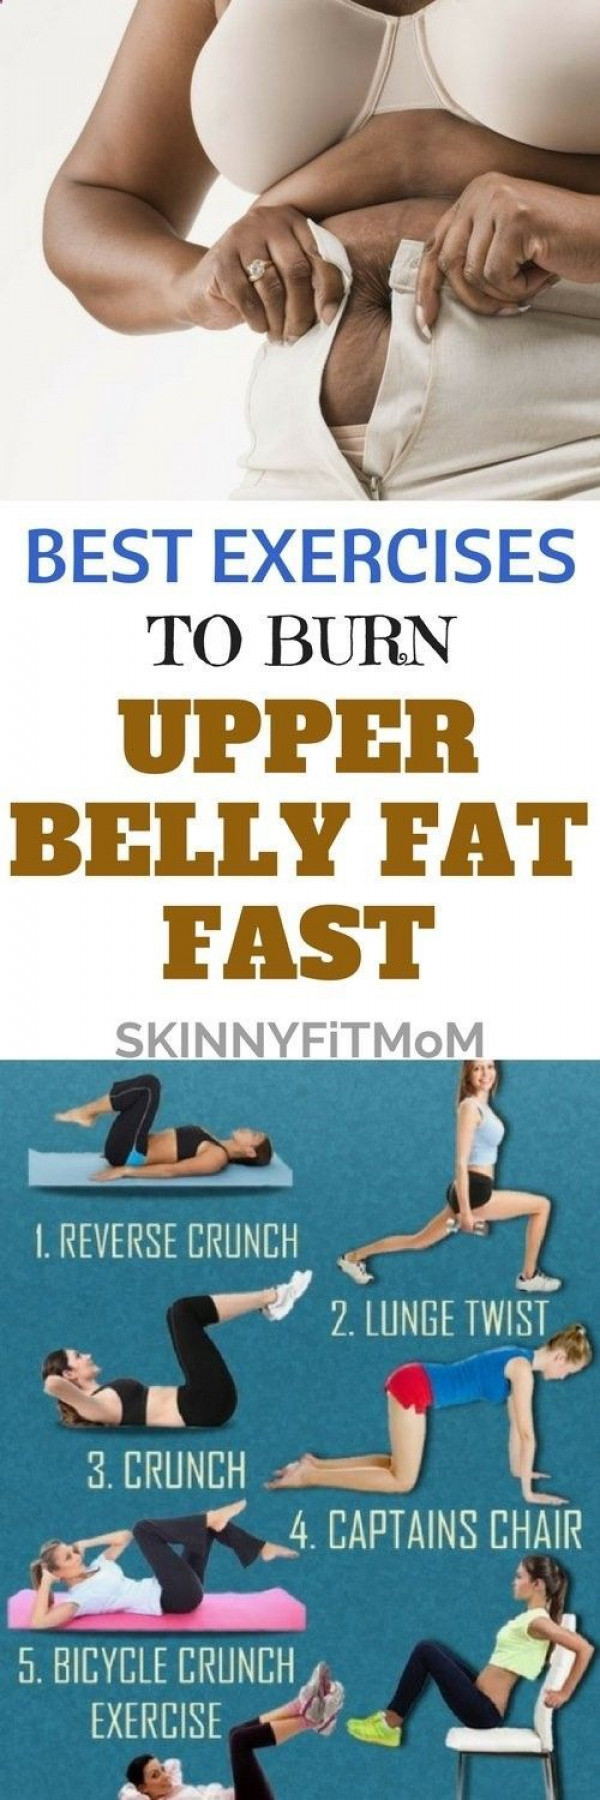 Burn Belly Fat Fast Flat Stomach
 Best Exercises To Burn Upper Belly Fat Fast – Simple Ways